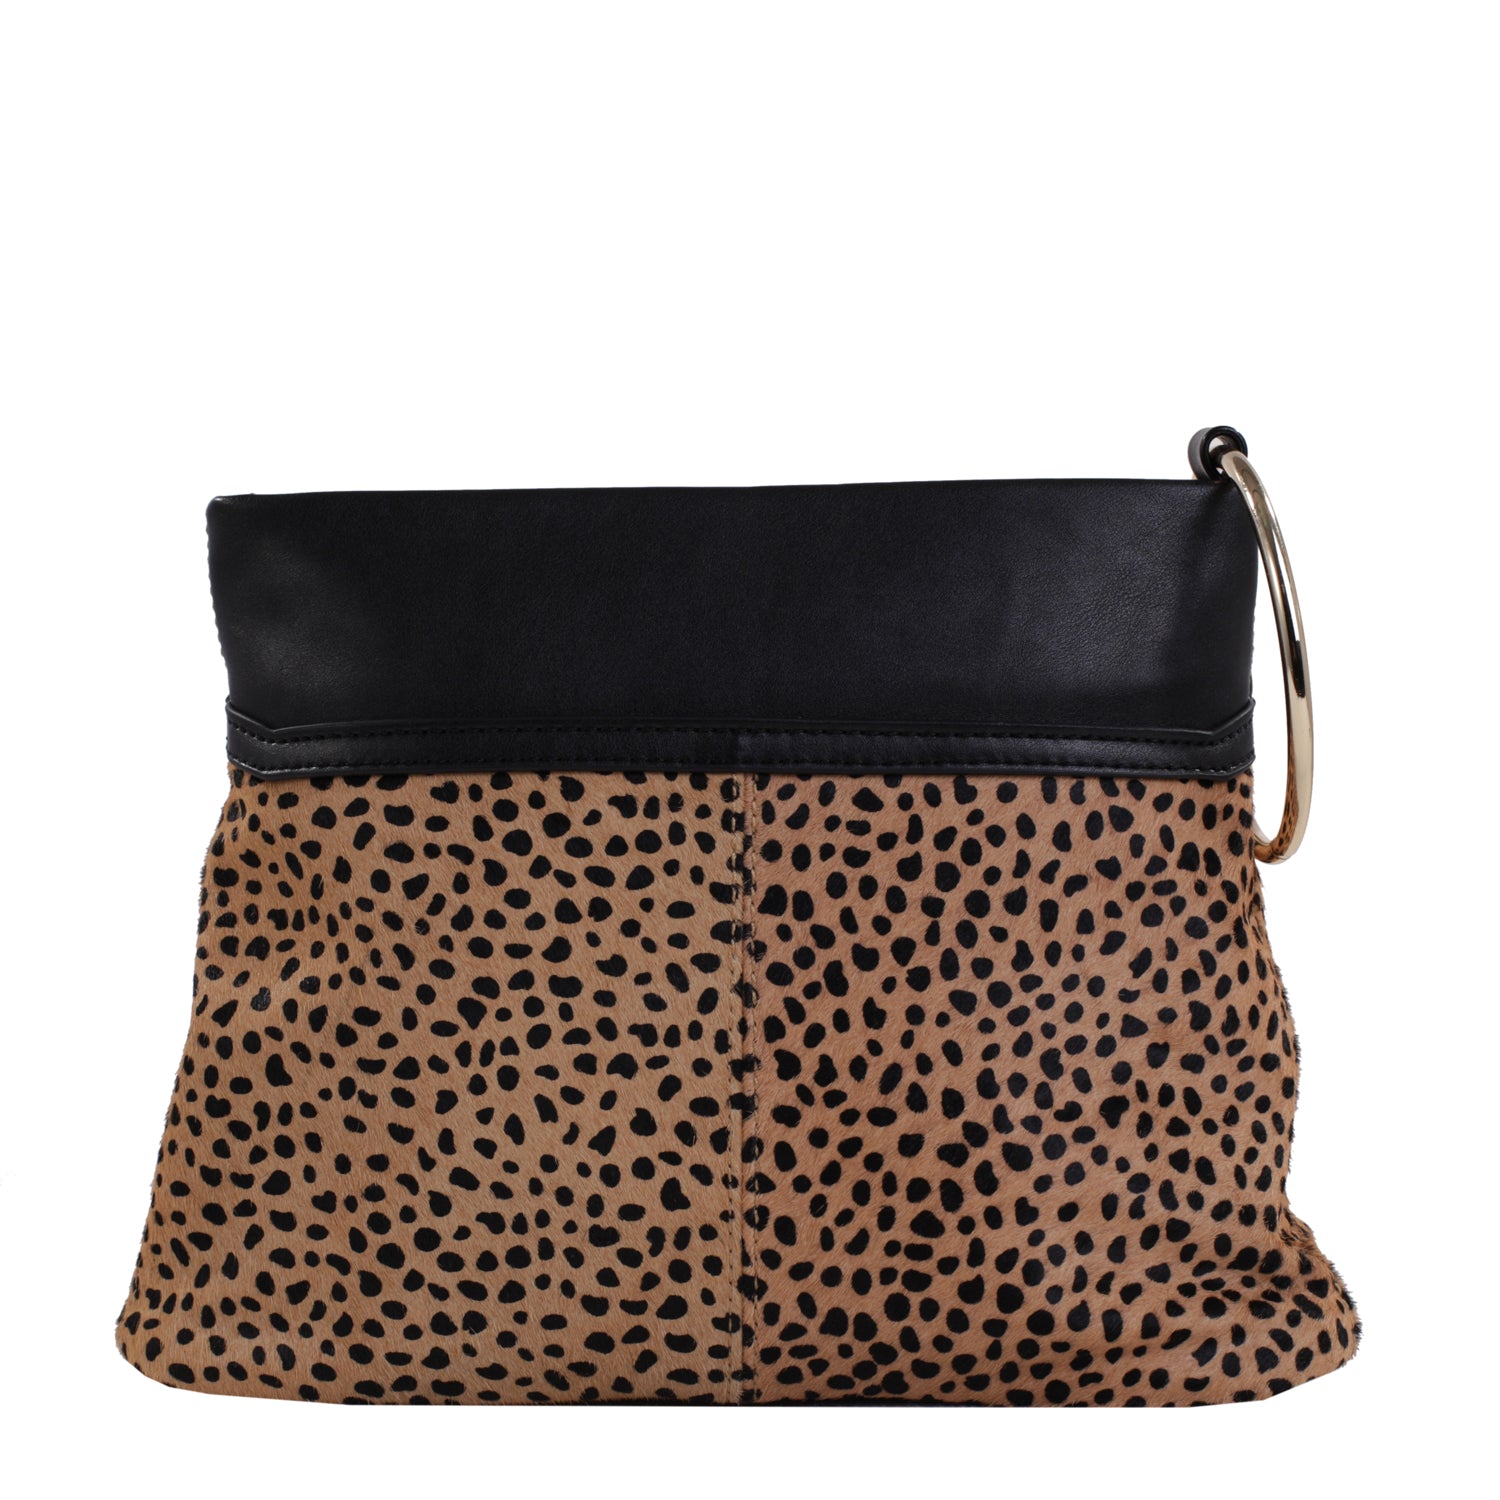 Juicy Couture Leopard Purse and Wallet - Women's handbags